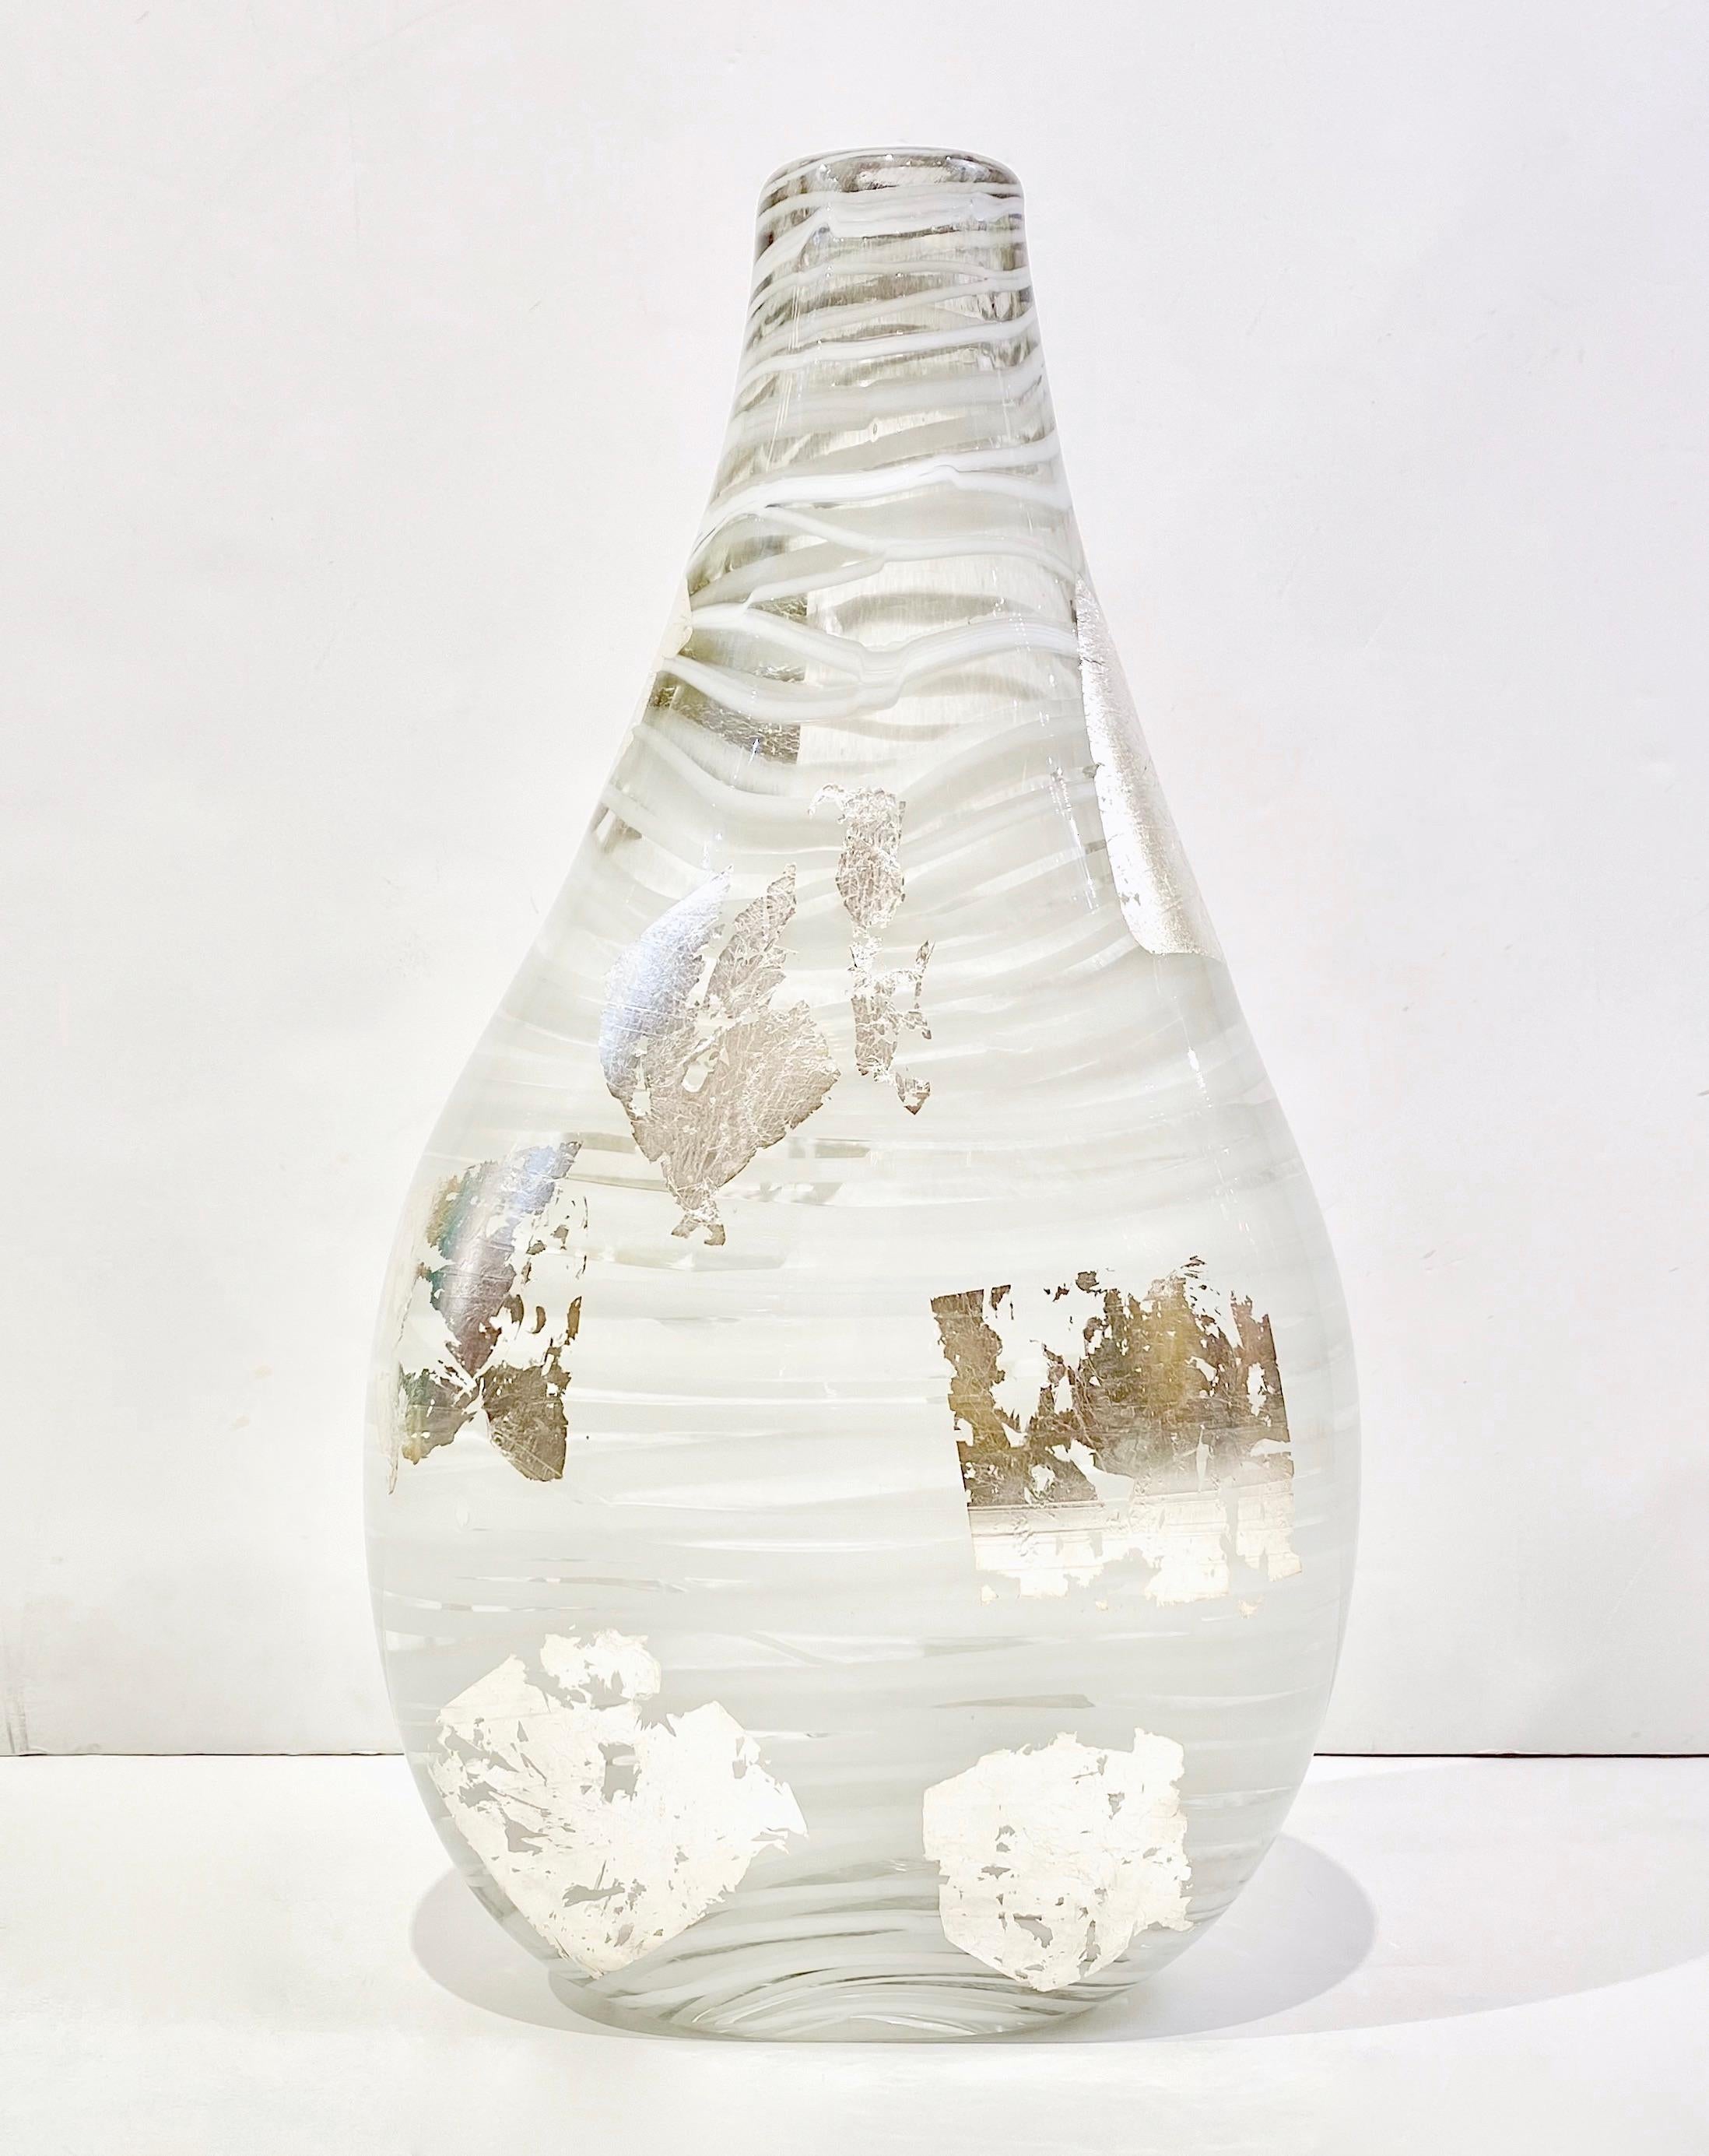 Elegant Minimalist organic creation, crystal clear thick blown Murano glass sculptural flower vase, decorated with white threading Filigrana wrapped around the drop shape, creating a fascinating abstract modern design. Le corps est rendu précieux